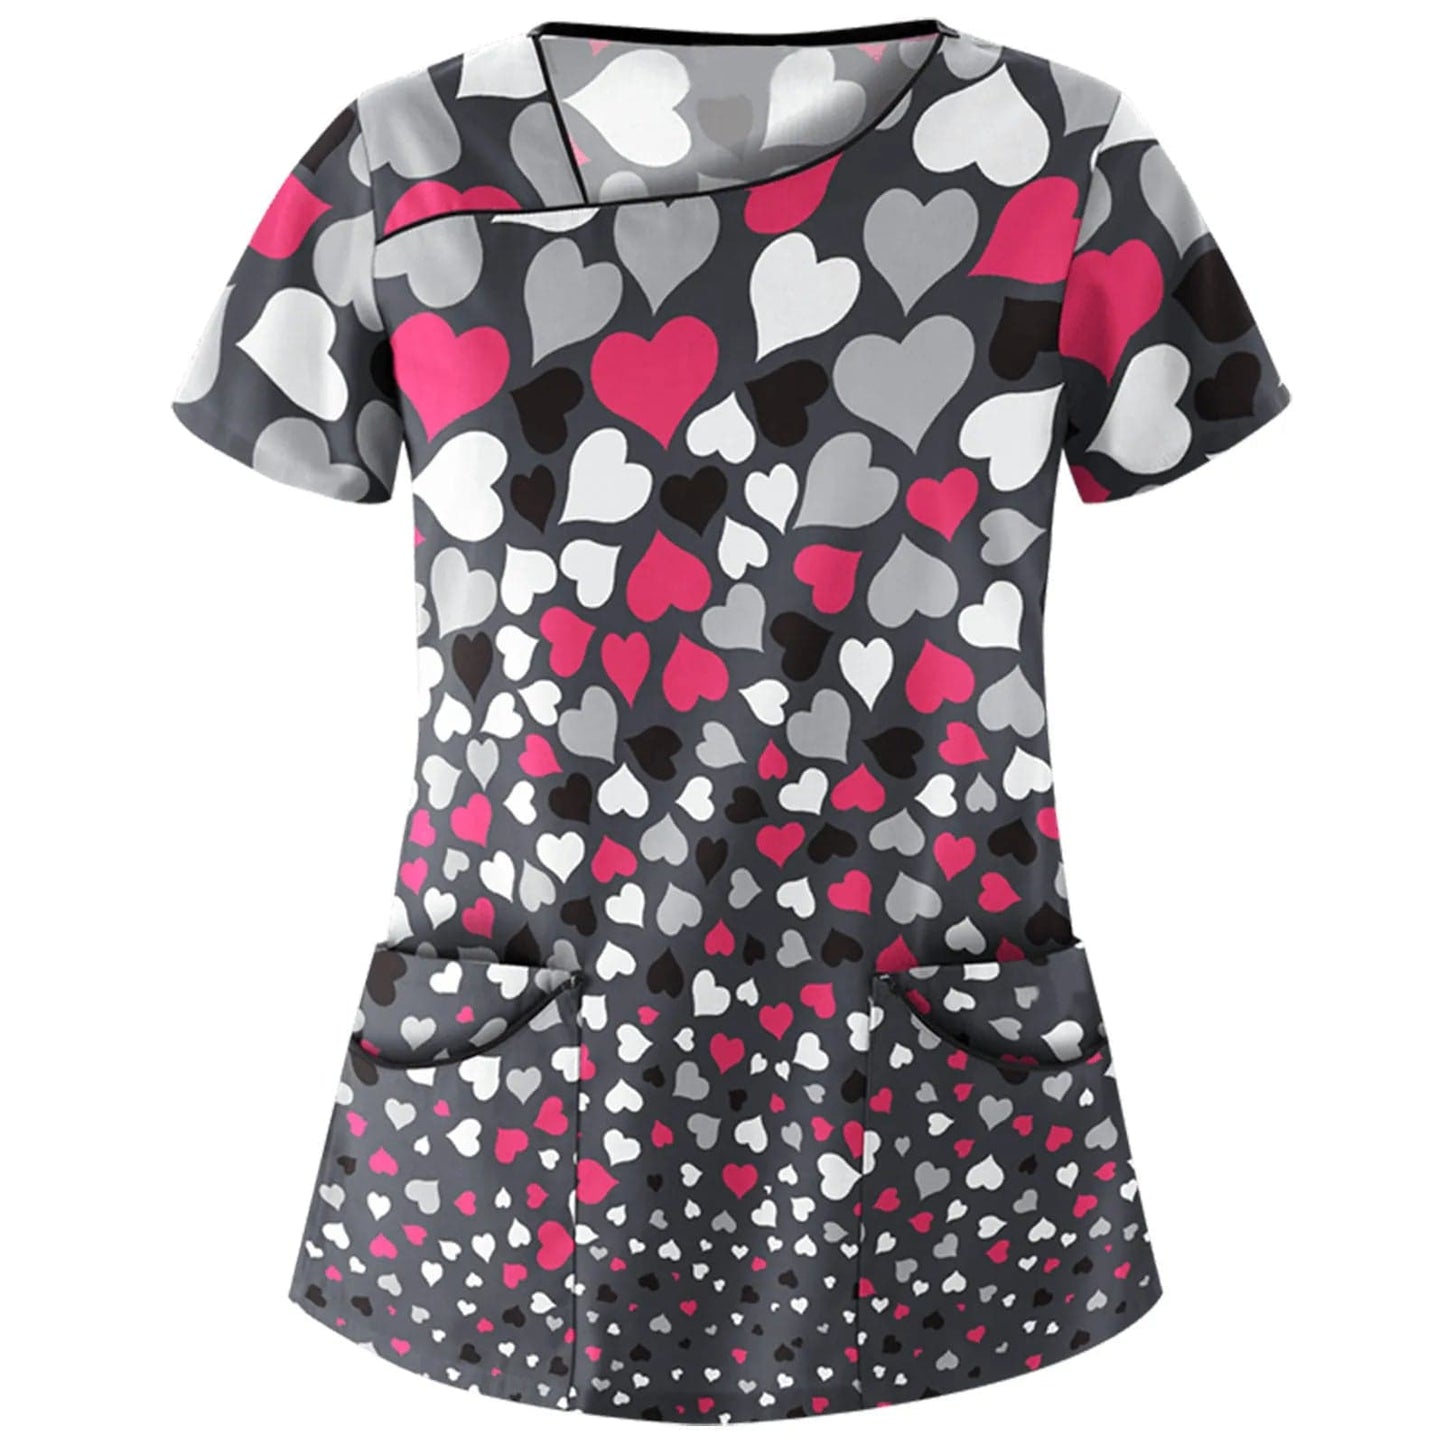 Women's Whimsical Print Stretch Medical Scrub Top  Pioneer Kitty Market S Hearts 